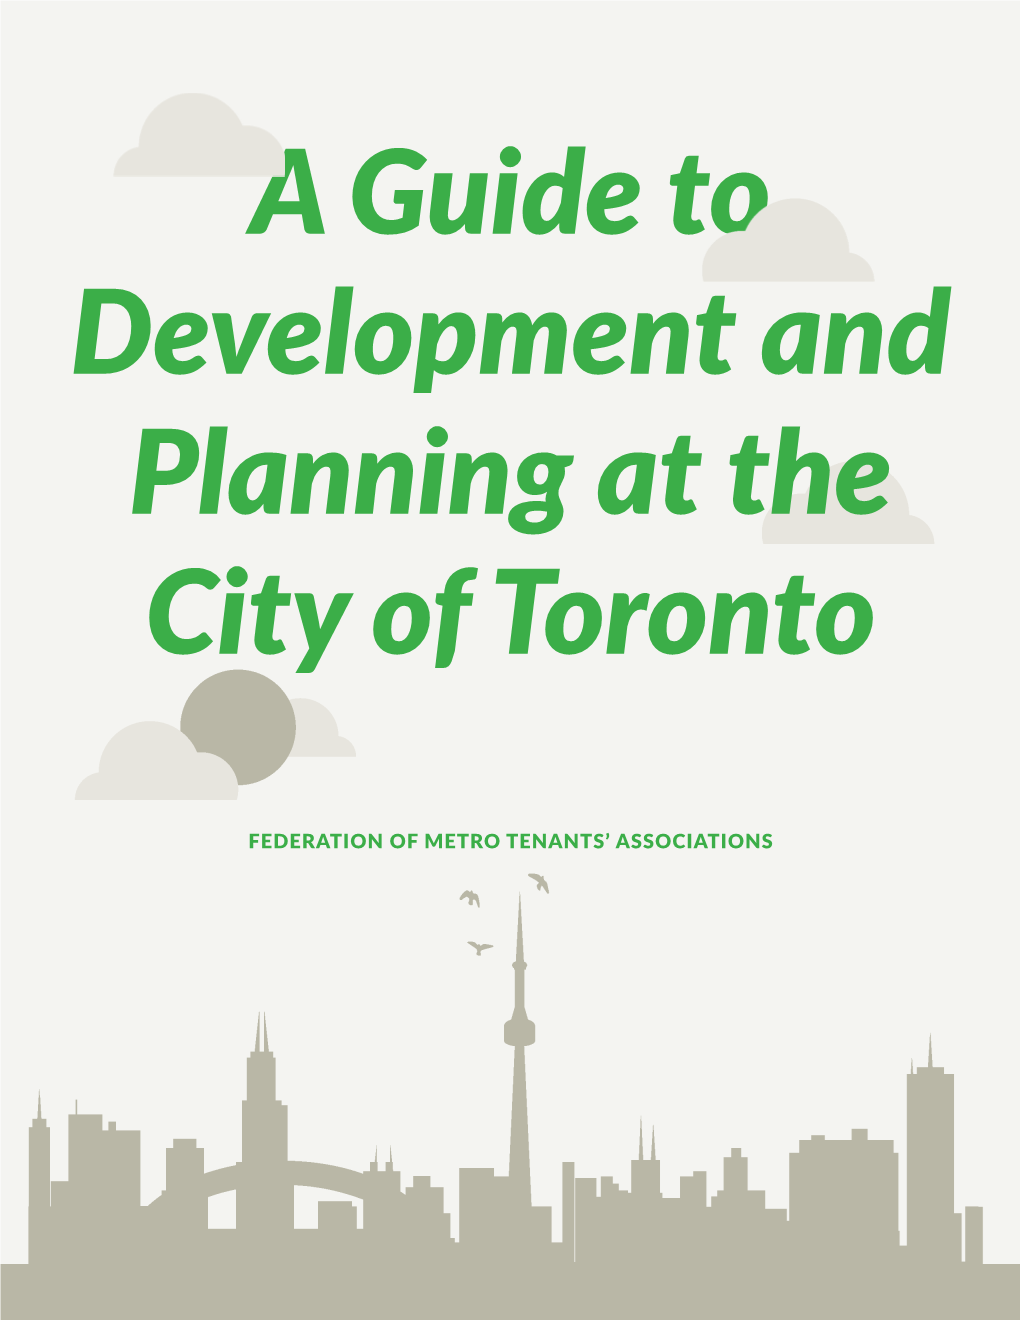 Planning at the City of Toronto